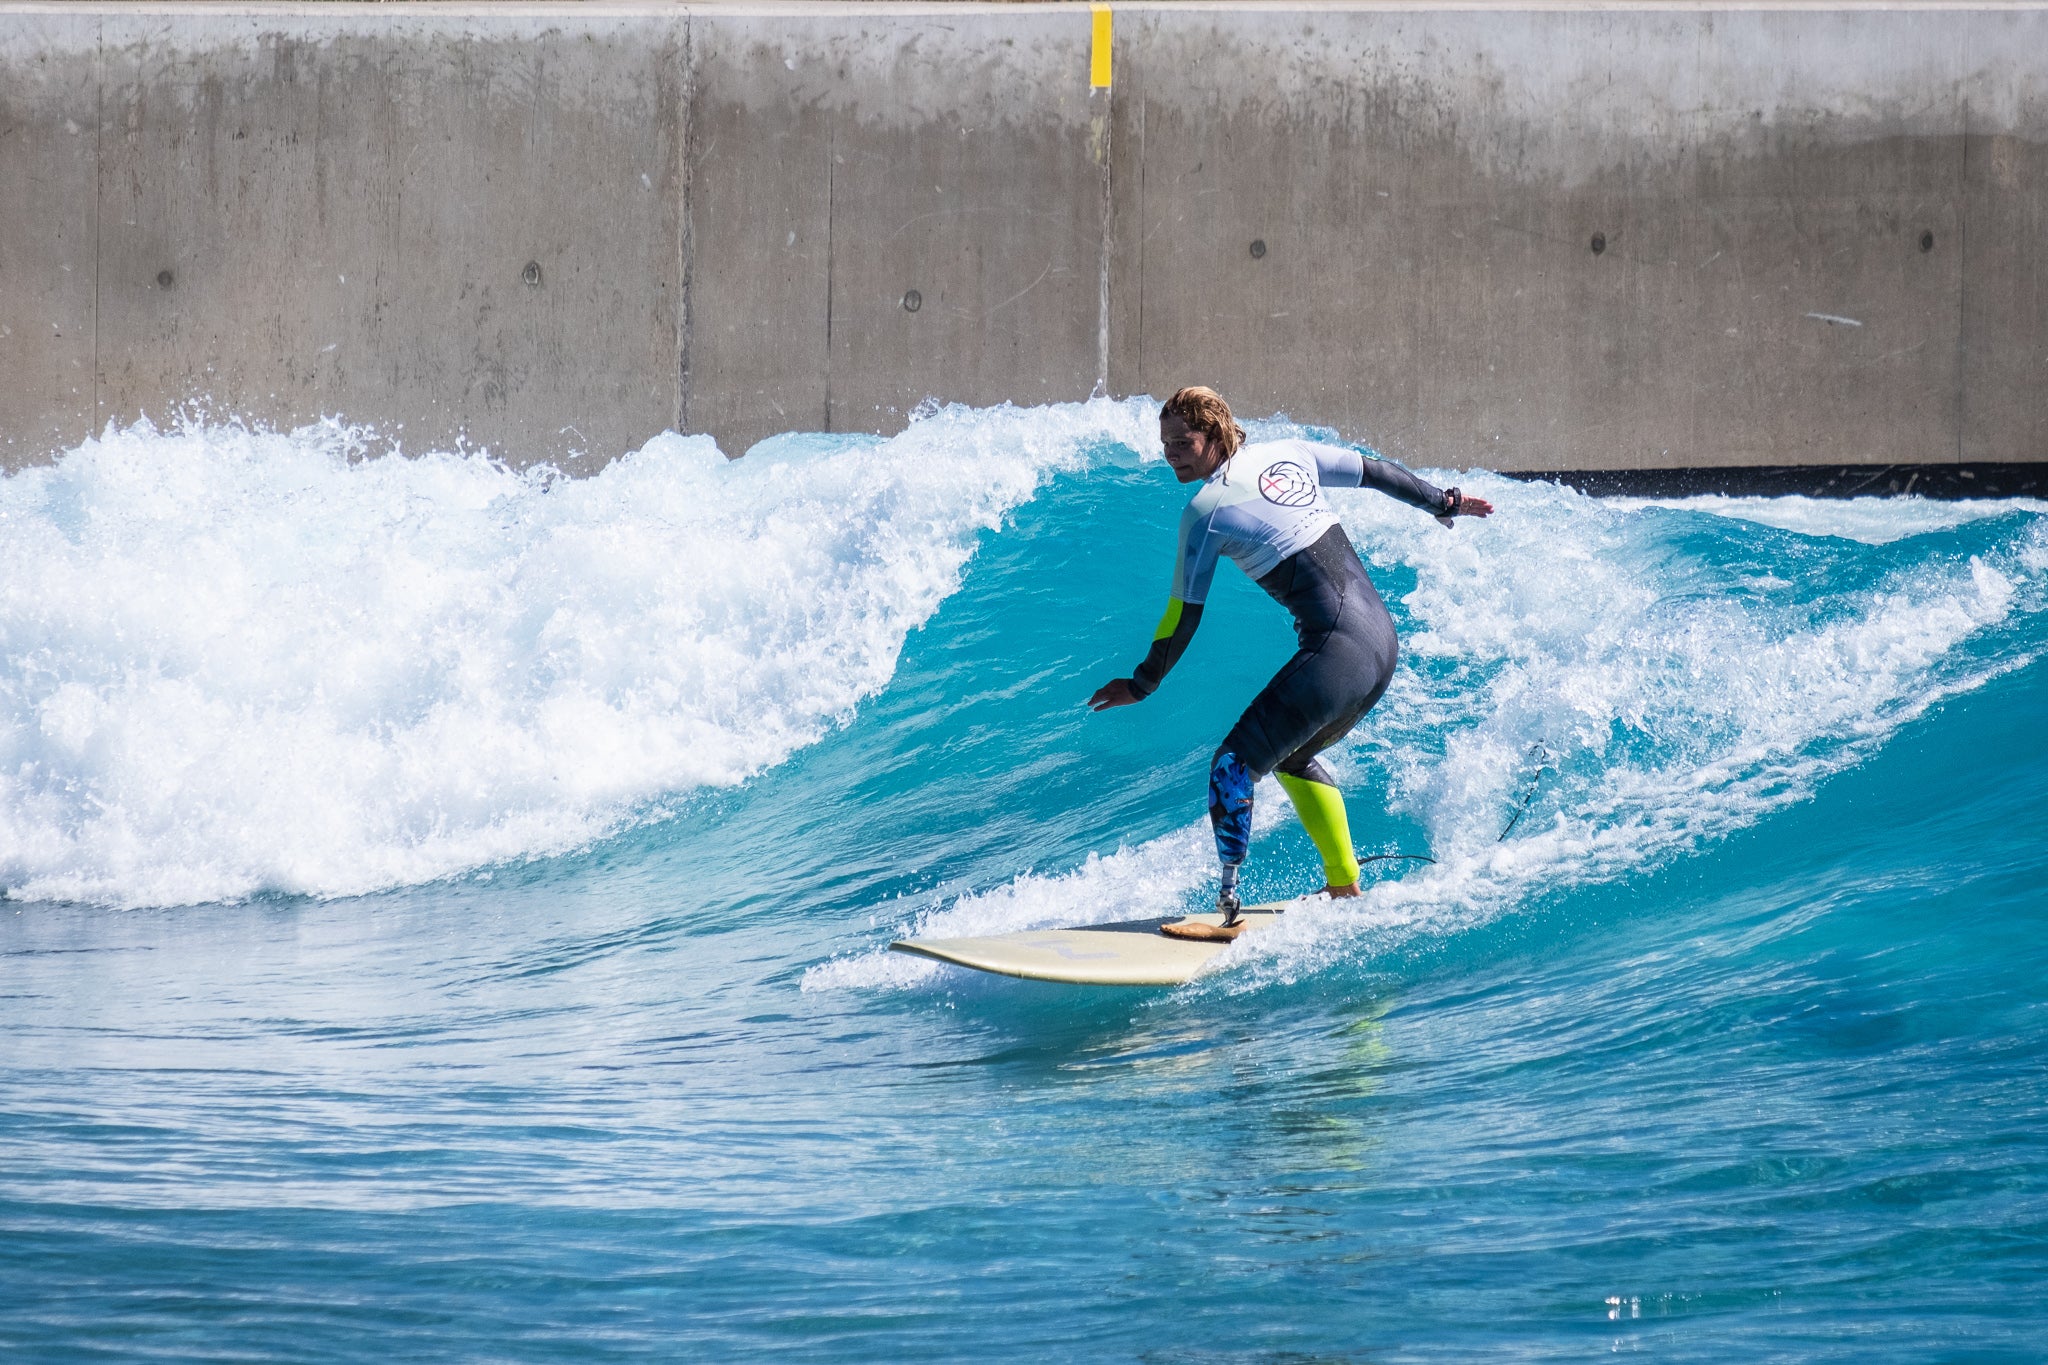 Adaptive Surfer Zoe Smith surfing at The Wave 